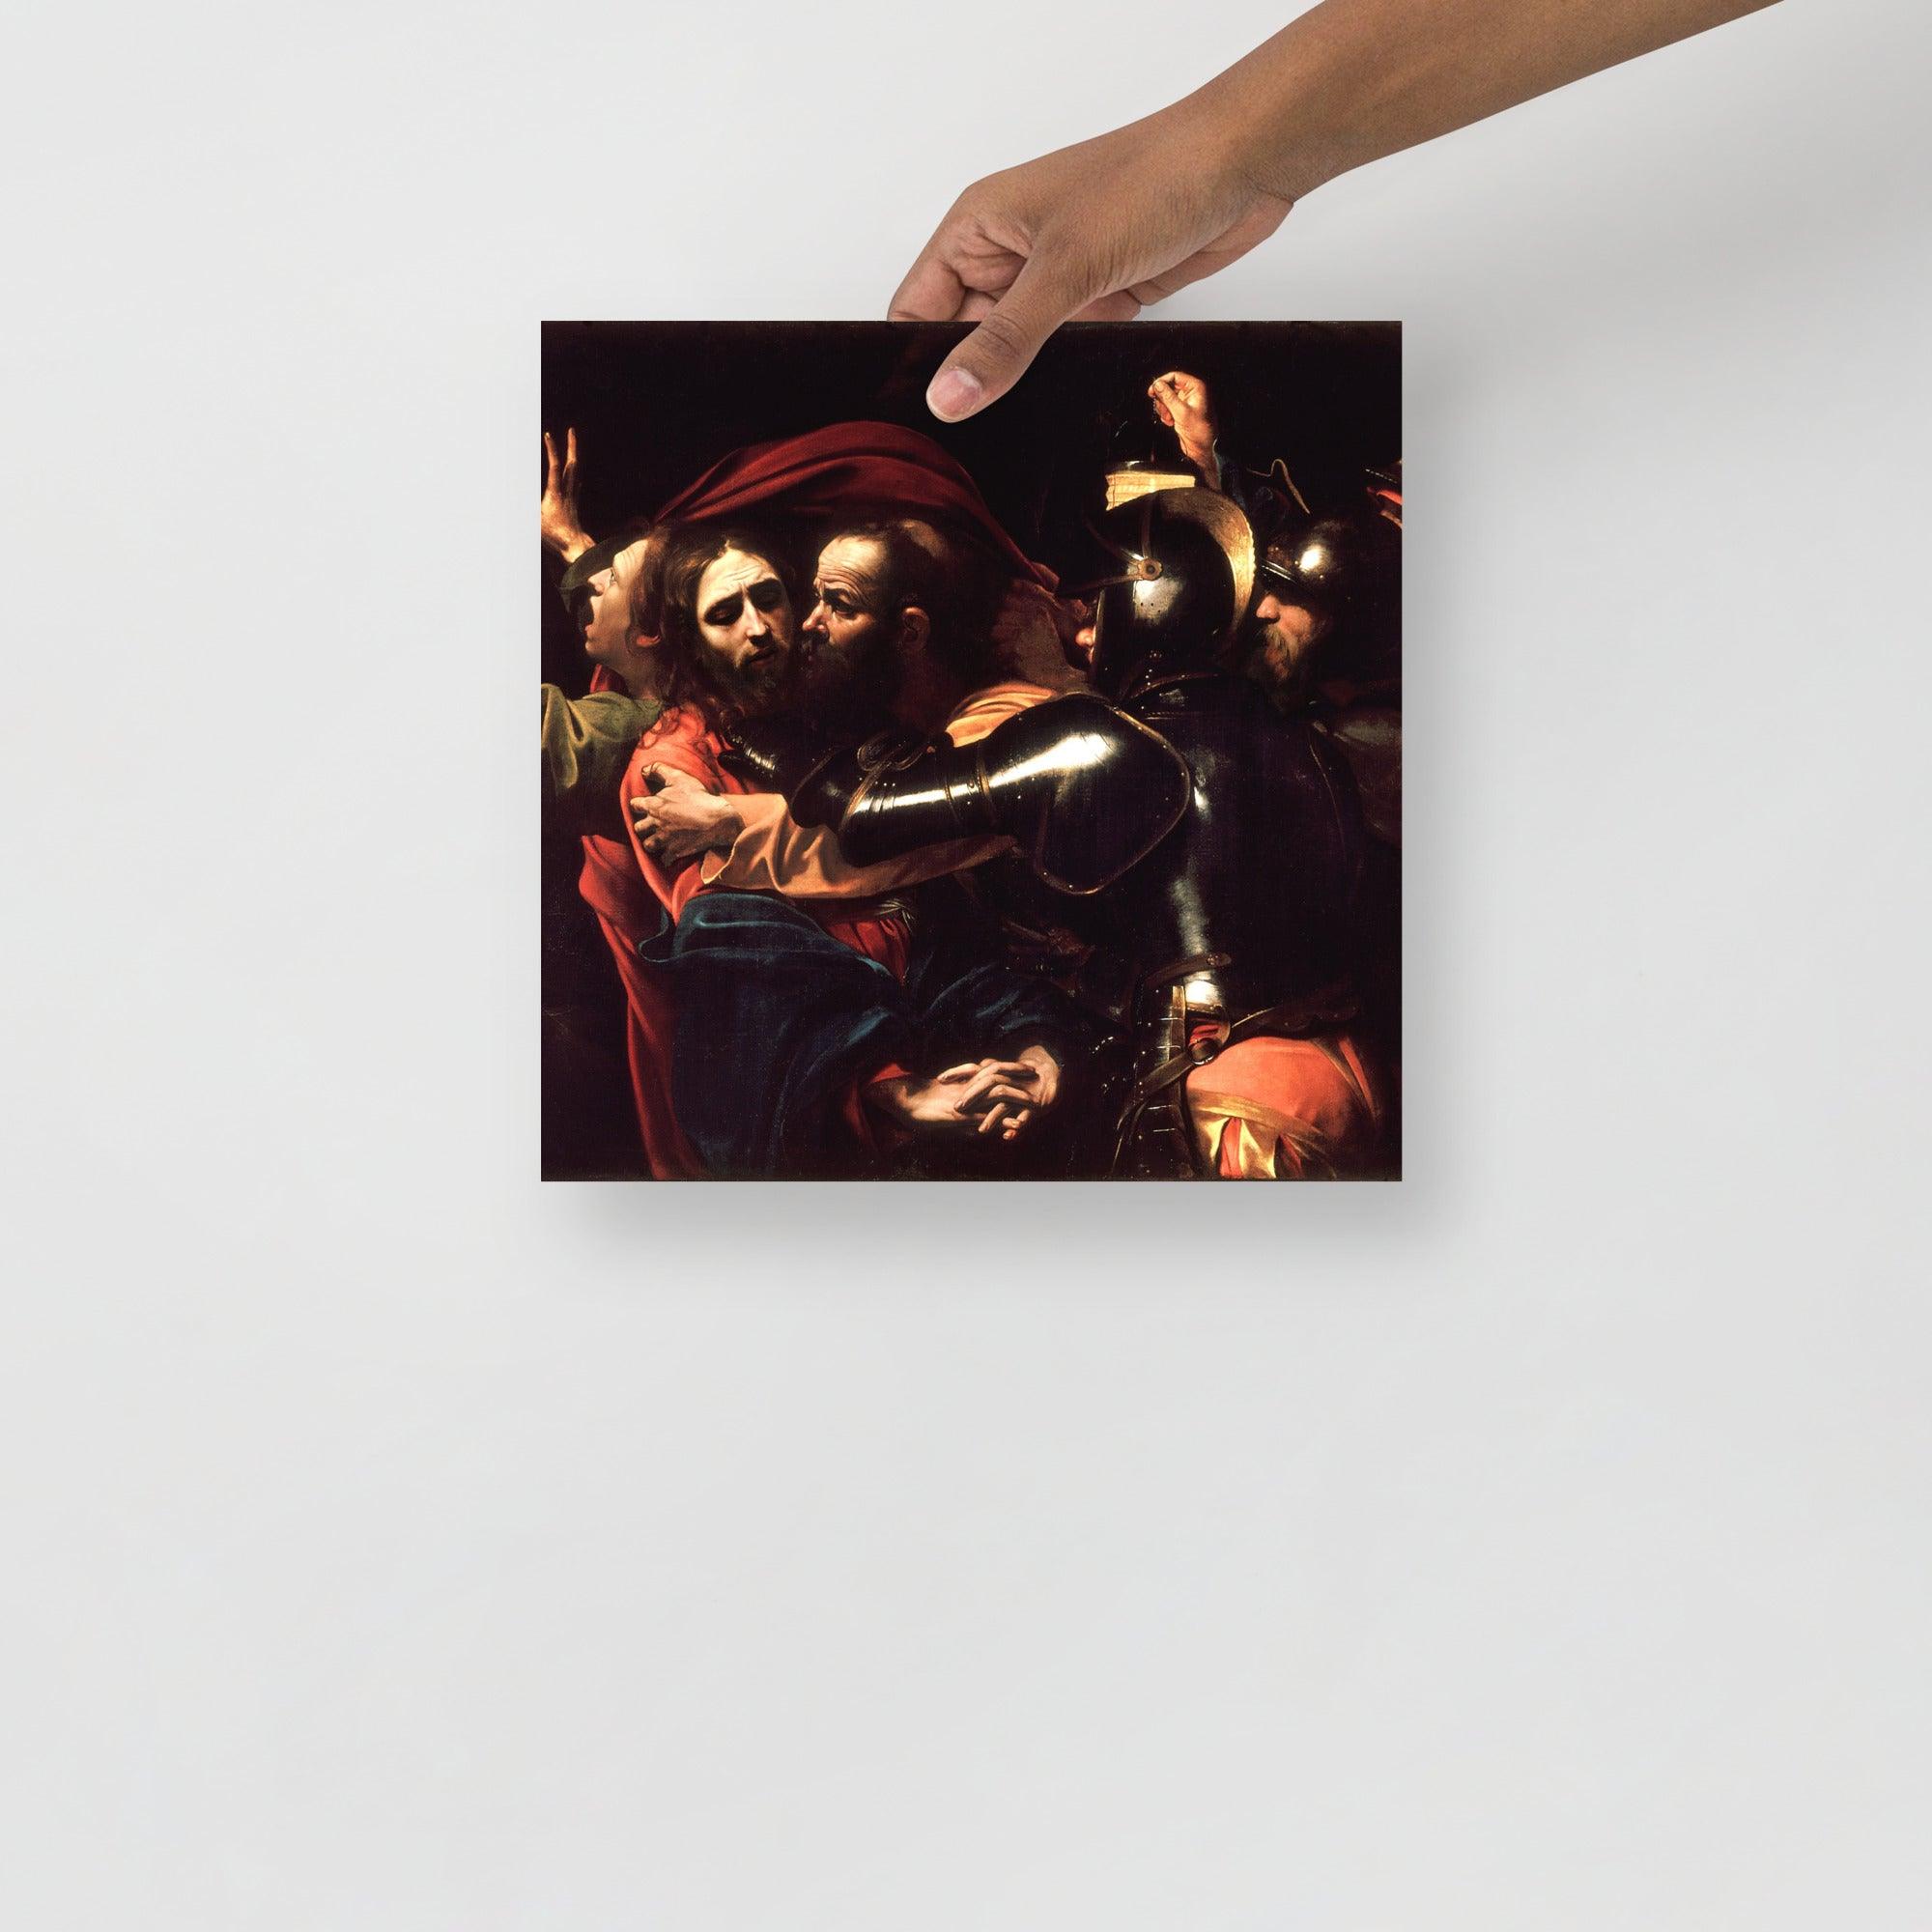 The Taking of Christ by Caravaggio poster on a plain backdrop in size 12x12”.